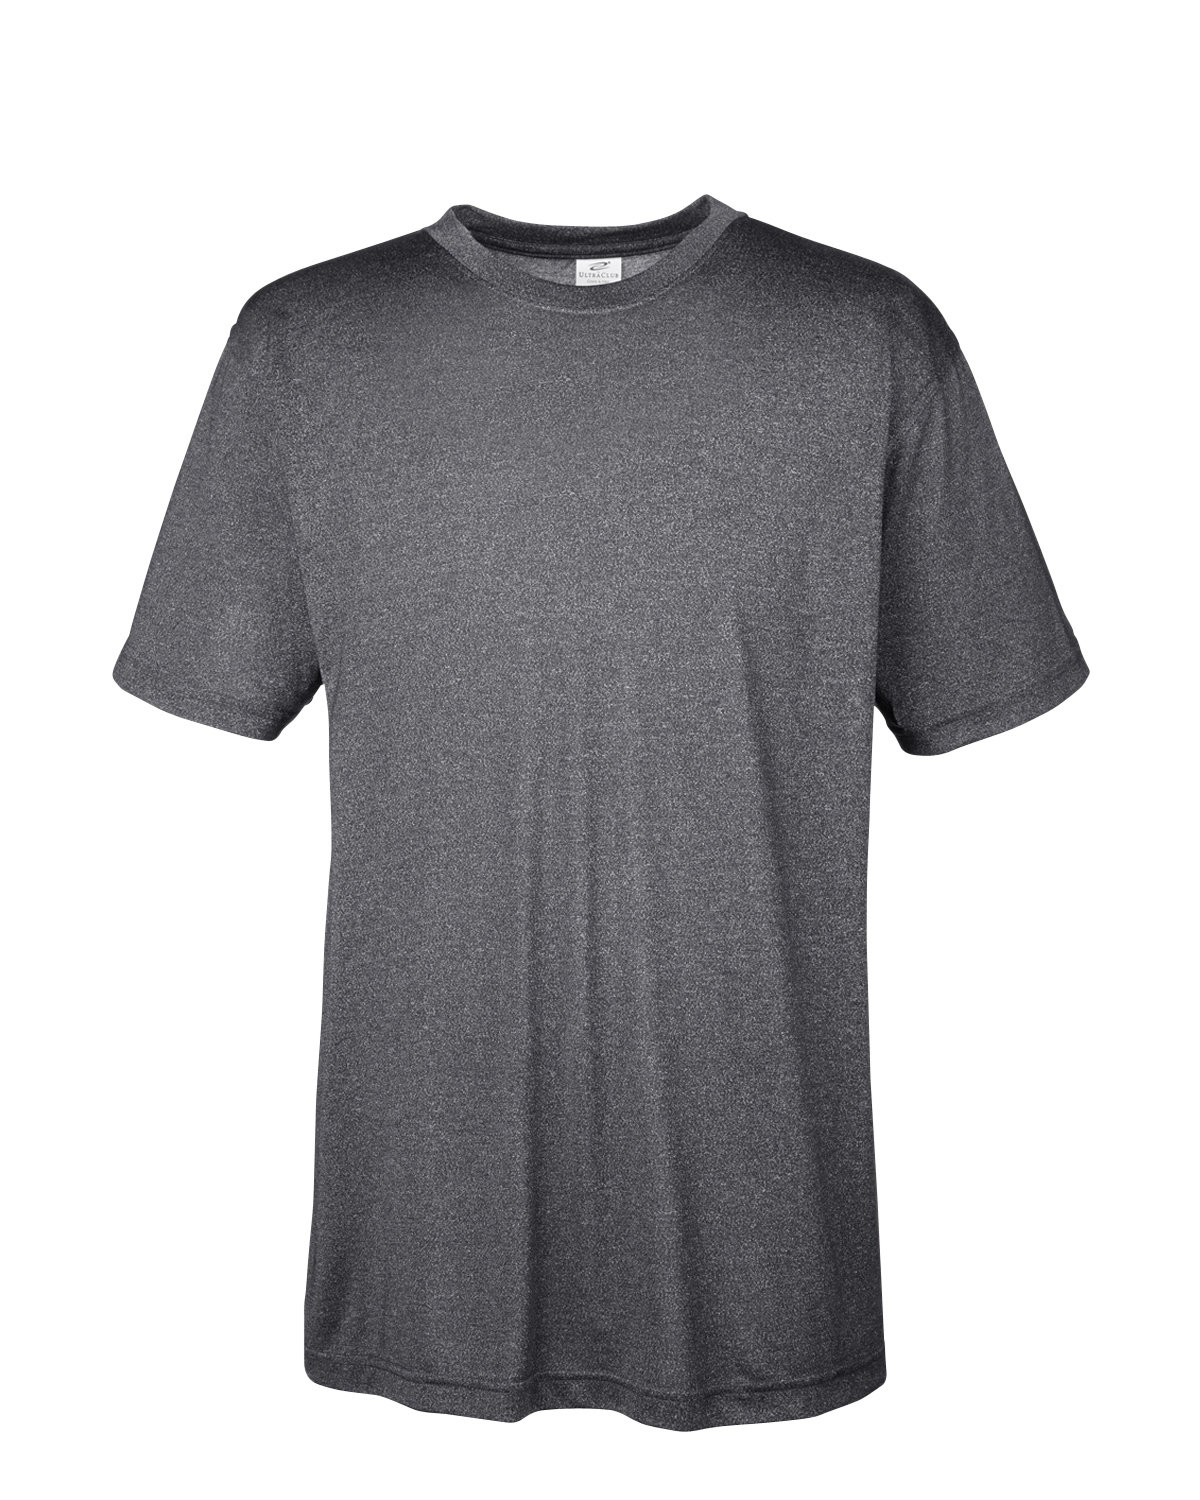 UltraClub Men's Cool & Dry Heathered Performance T-Shirt | alphabroder